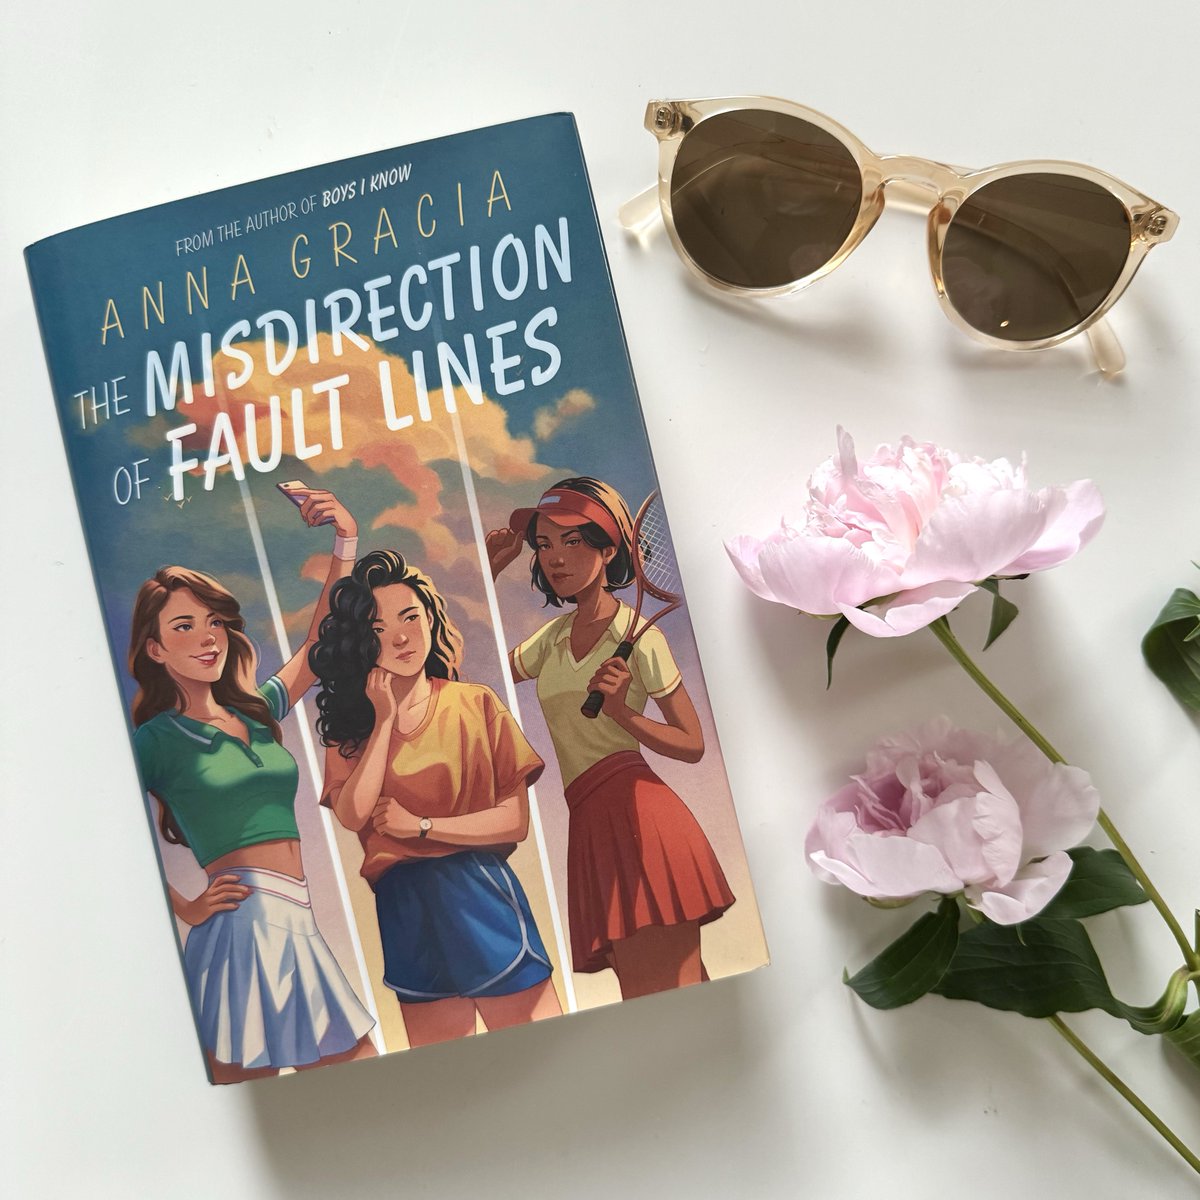 Three Asian American teen girls compete at an elite tennis tournament for a shot at their dreams—if only they knew what their dreams were. THE MISDIRECTION OF FAULT LINES is the perfect sporty summer read! ow.ly/9uX150RIYTg #yalit #summerreading